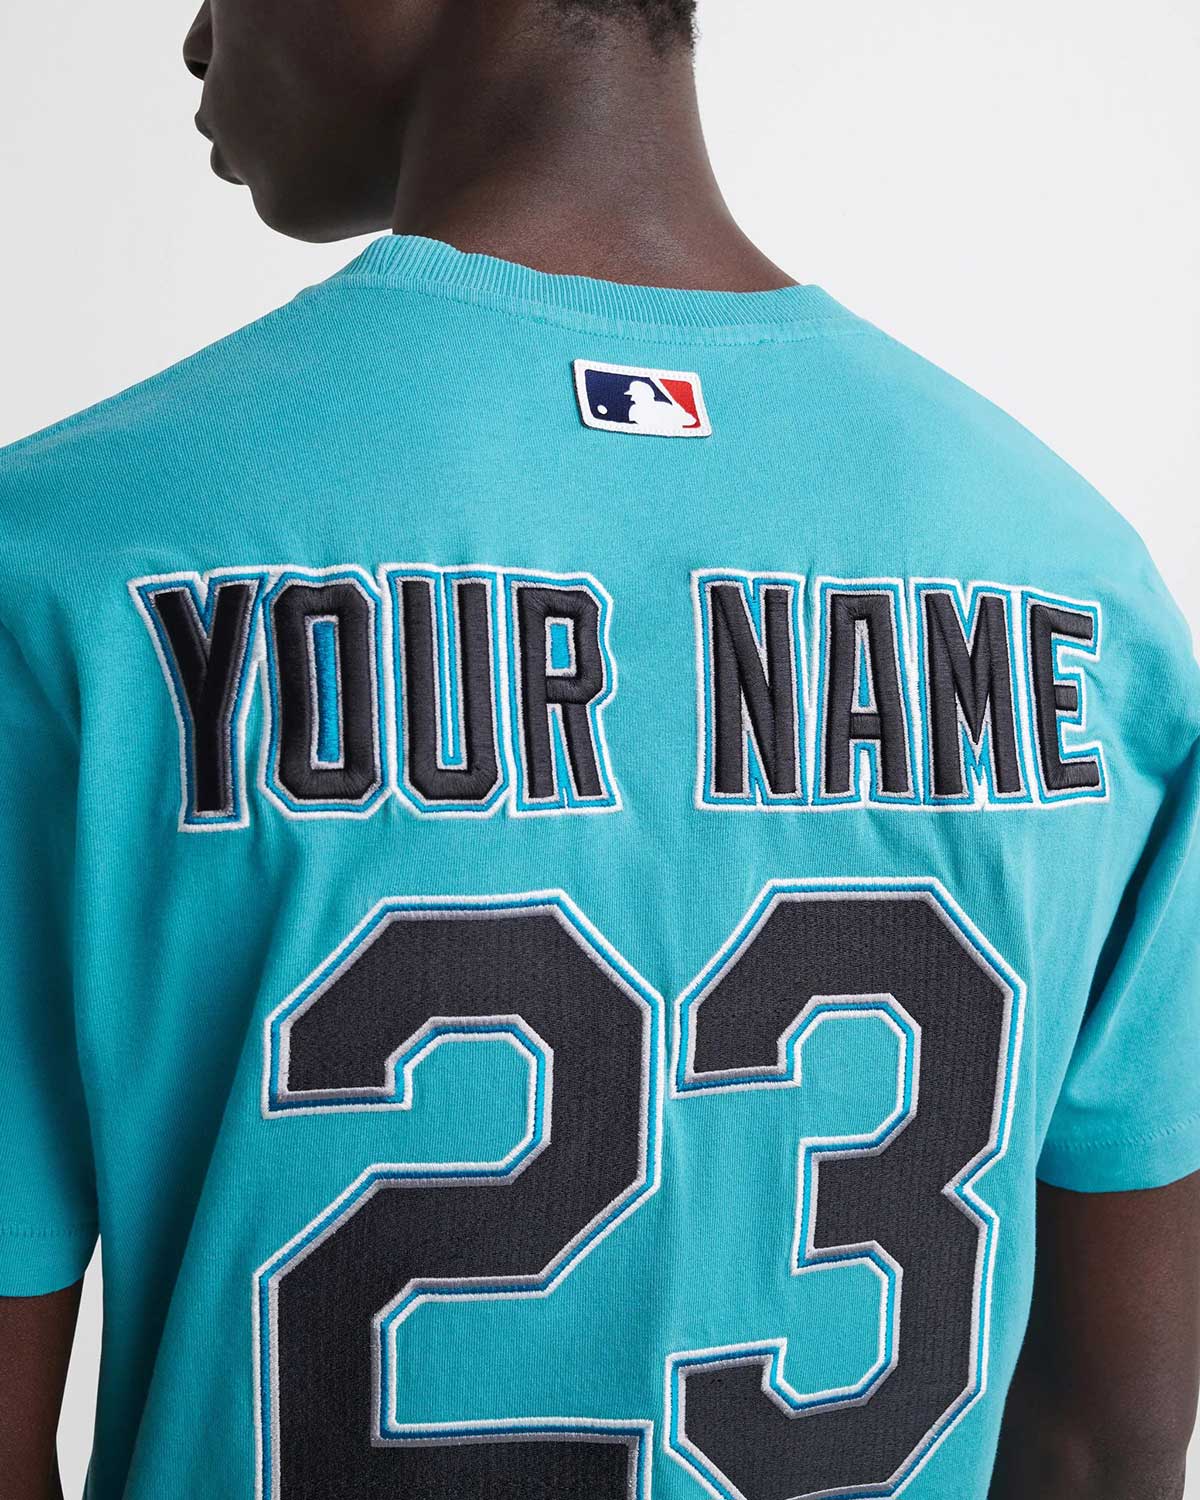 Off-White Is Making $1,100 Baseball Jerseys With Holes in Them, and Baseball  Fans Have Some Questions